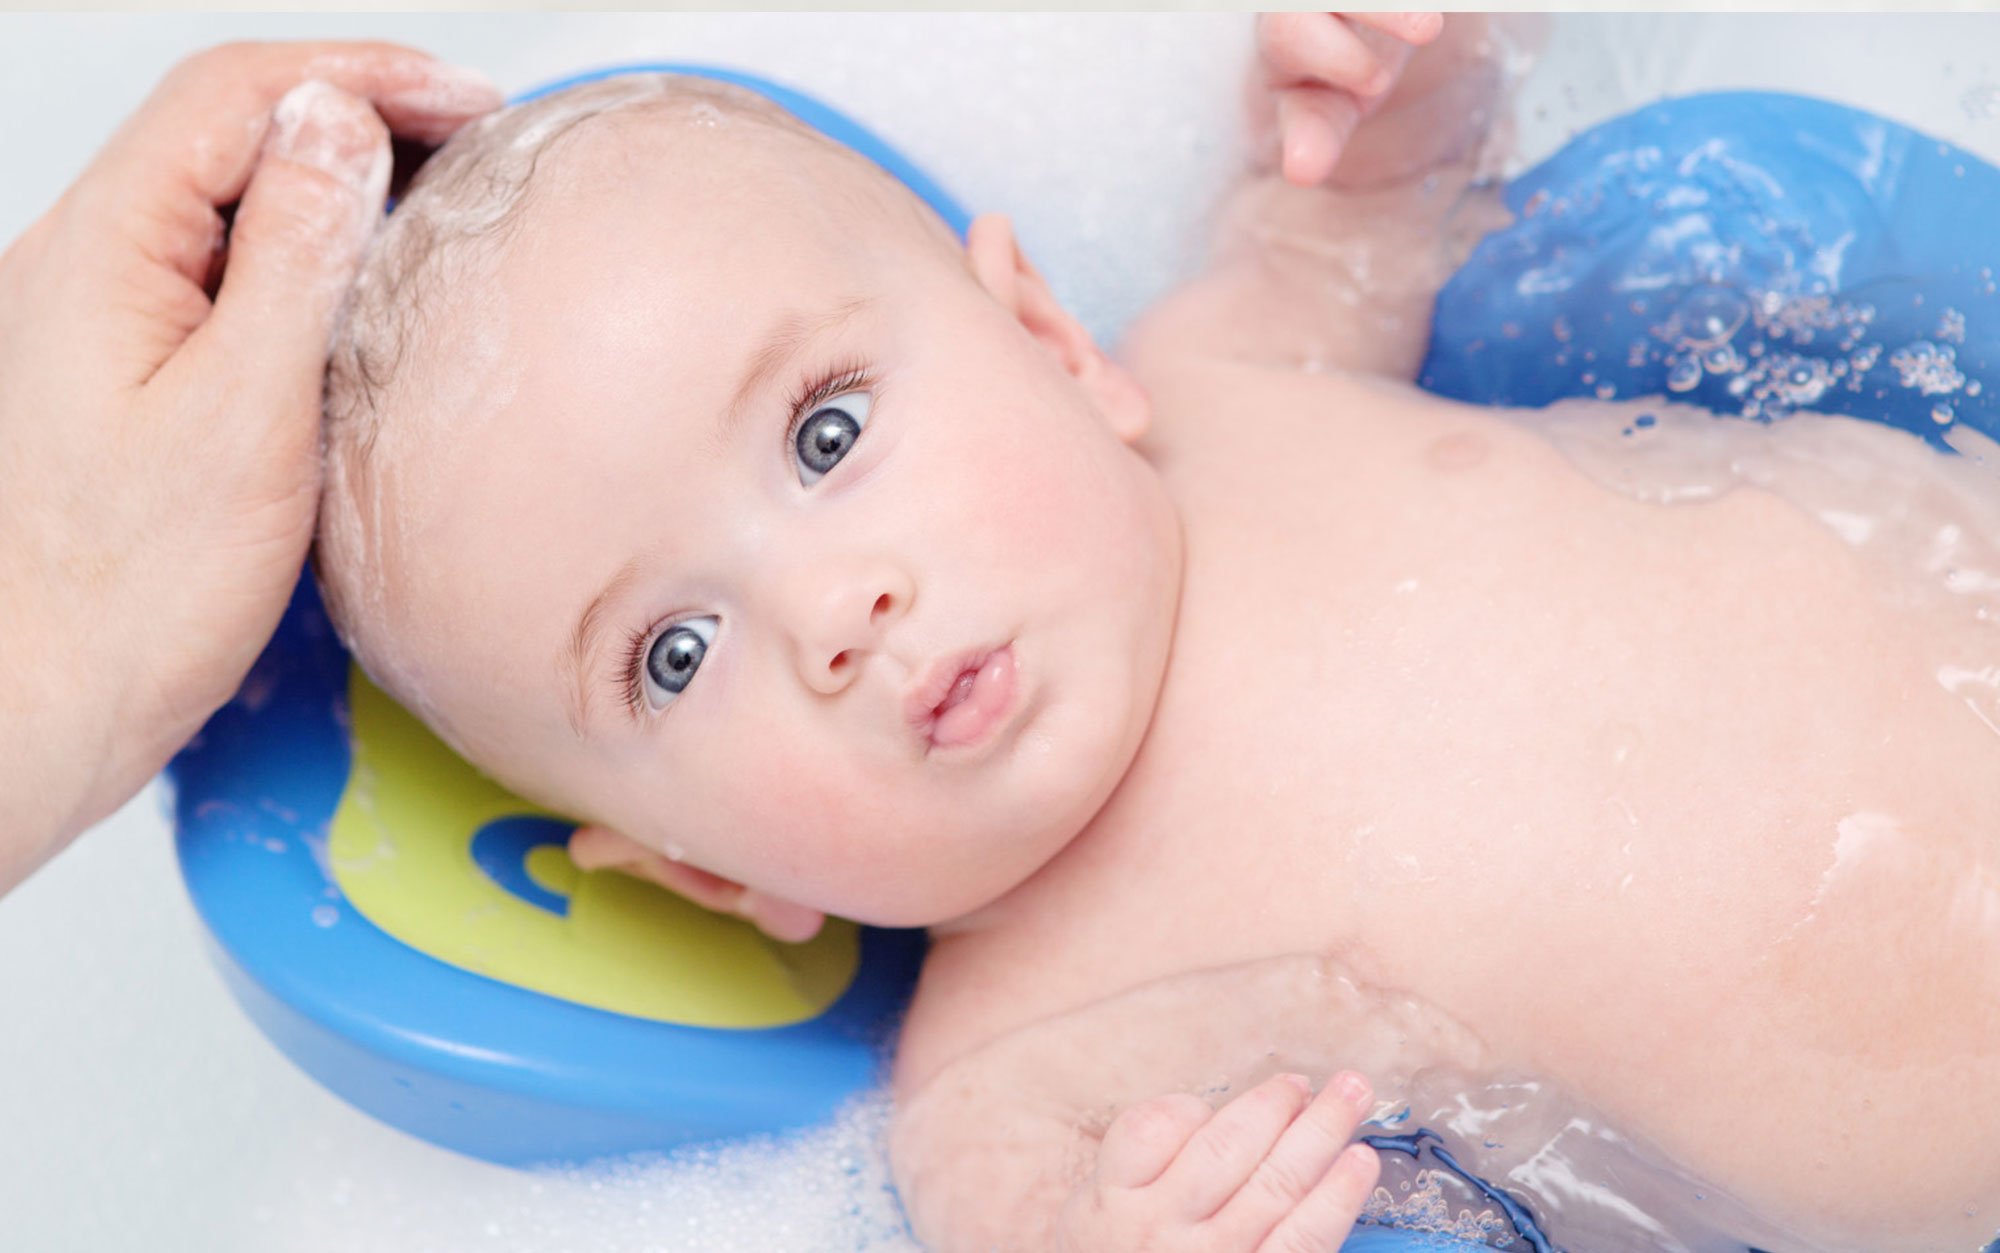 When should I give my baby the first bath?